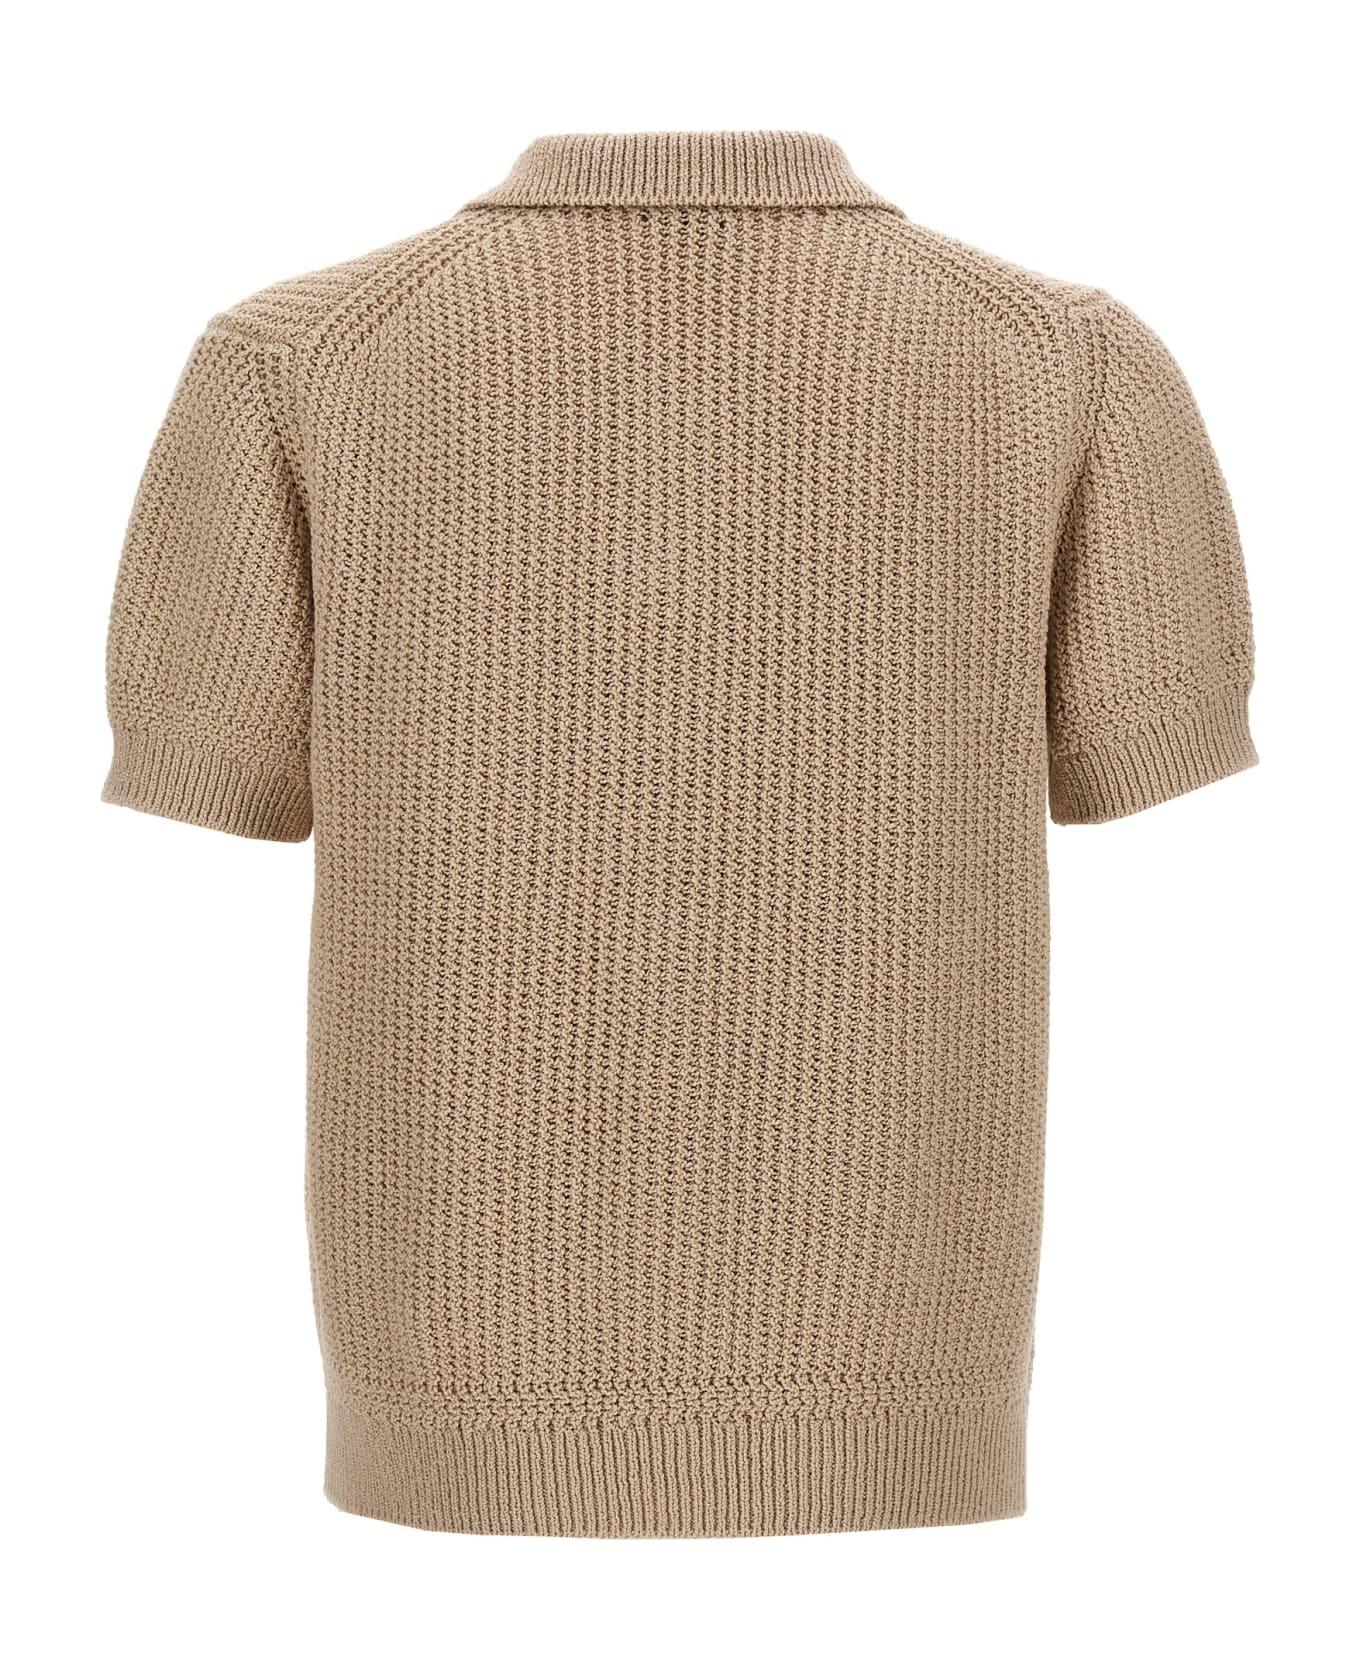 Brioni Knitted Polo Shirt - Beige